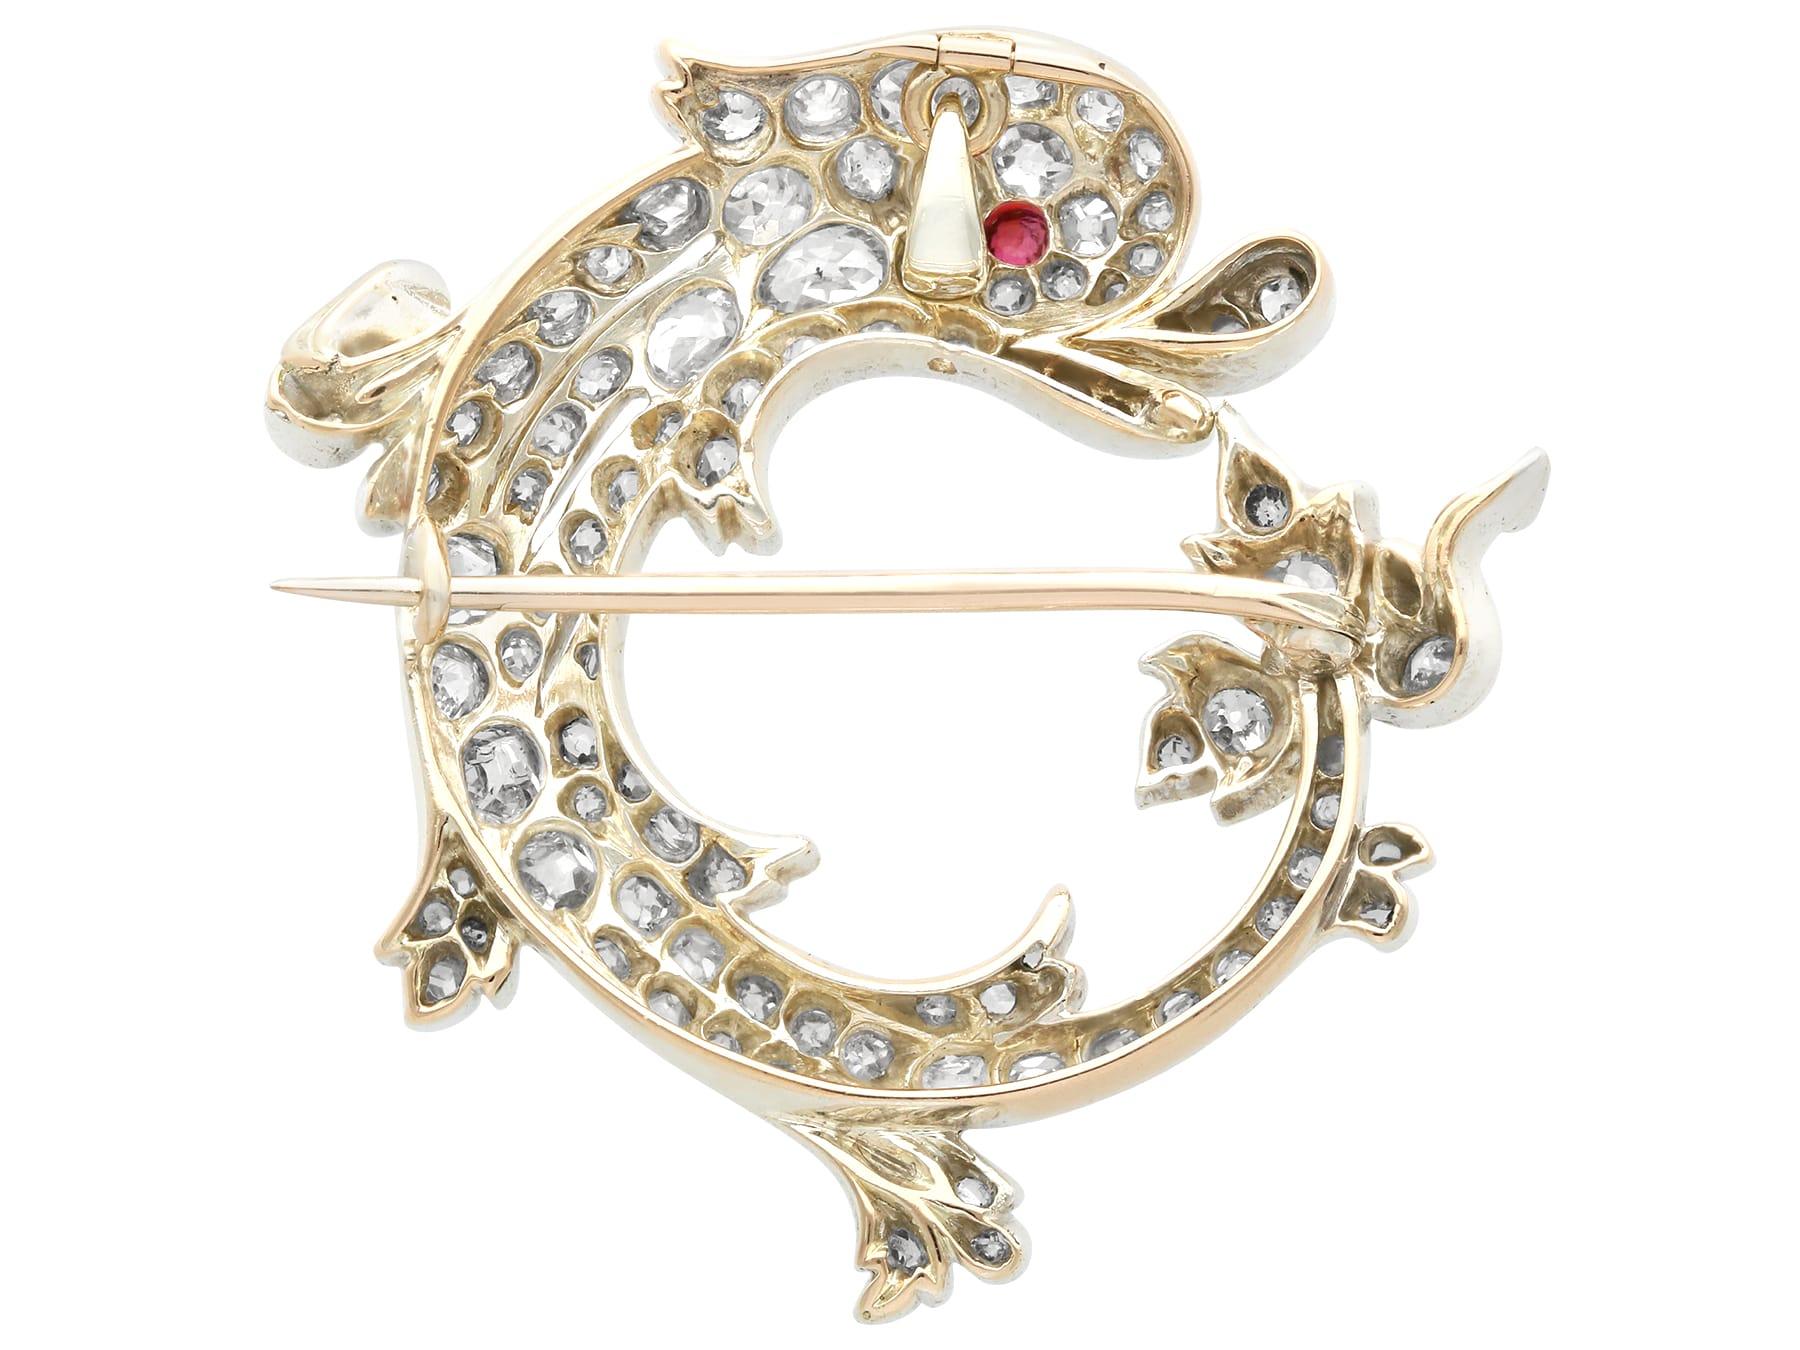 Women's or Men's Antique 3.05 Carat Diamond and Ruby 12 Carat Yellow Gold Dolphin Brooch/Pendant For Sale